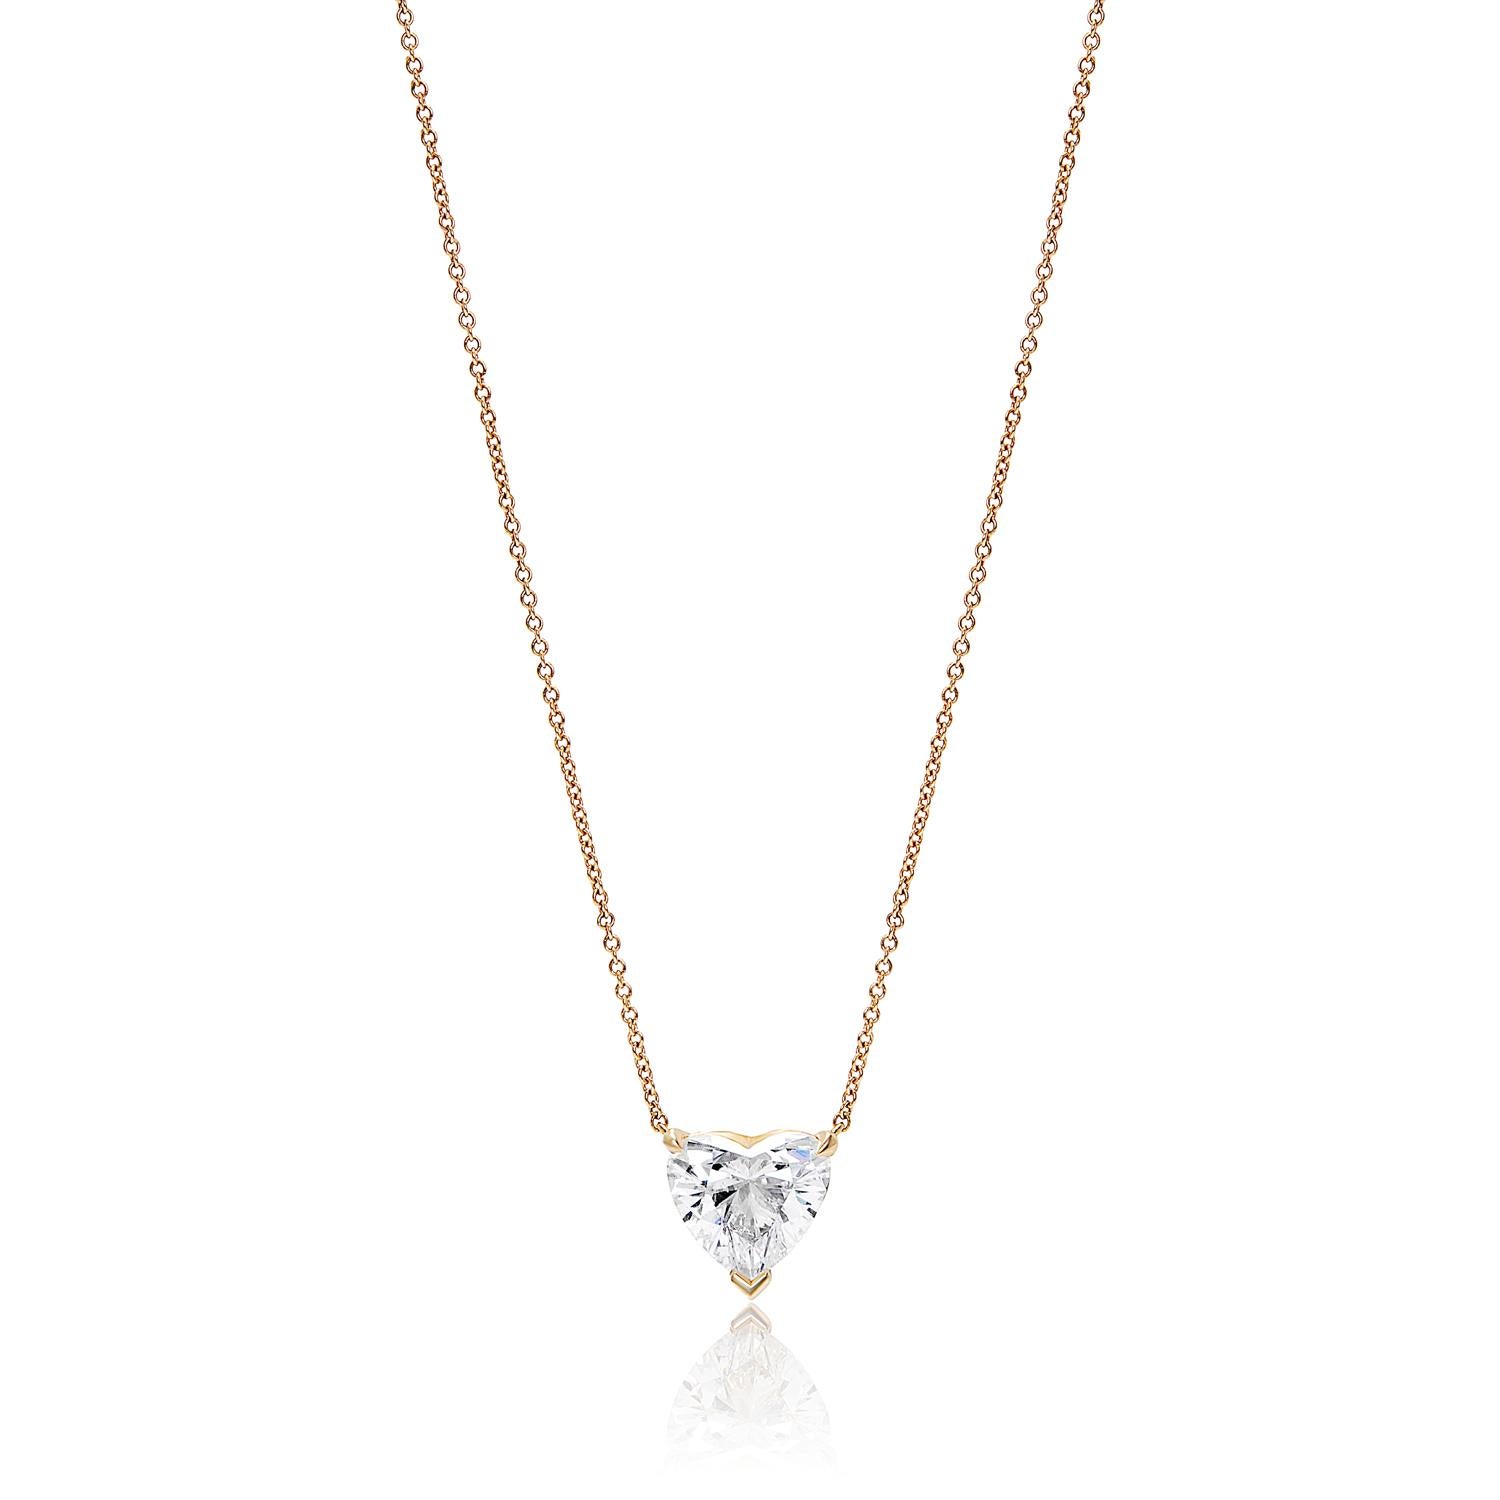 This luxurious piece features a 4.14 carat diamond, mined from the earth and cut into a stunning heart shape. It sparkles with a natural brilliance and fire that is truly captivating. The color is a clean, translucent white with a slight yellow hue.